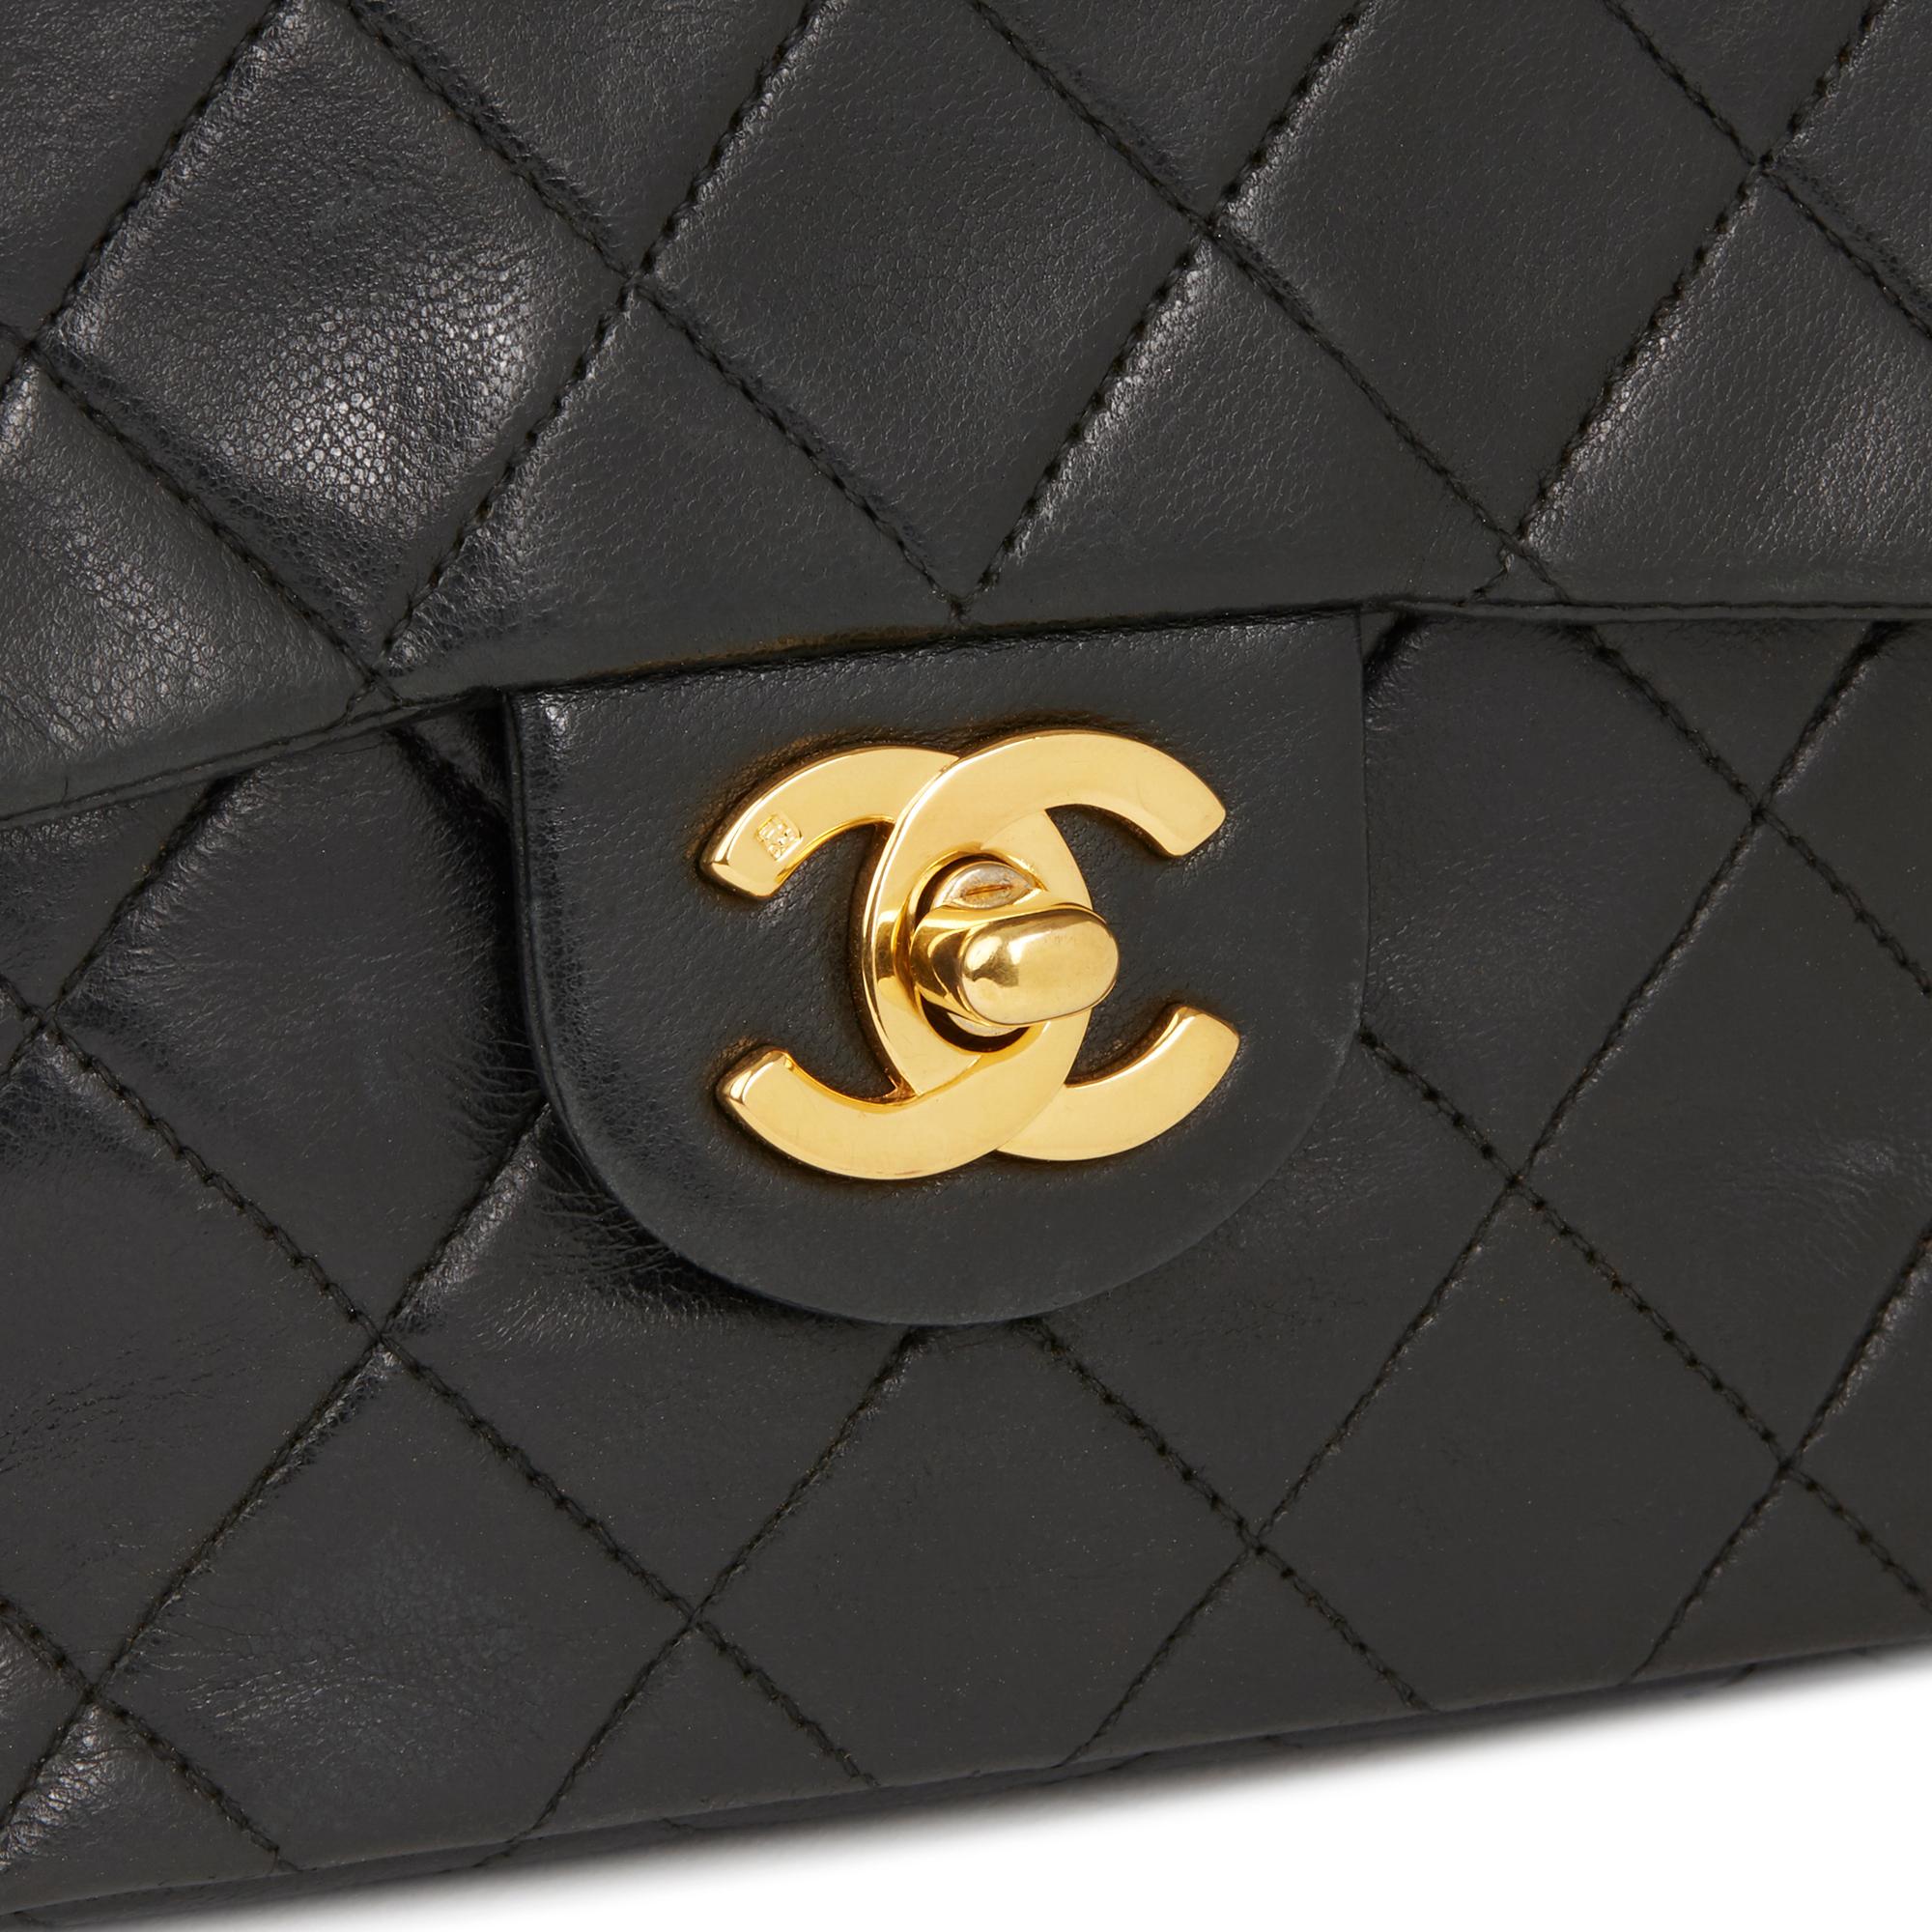 1989 Chanel Black Quilted Lambskin Vintage Mini Flap Bag 2